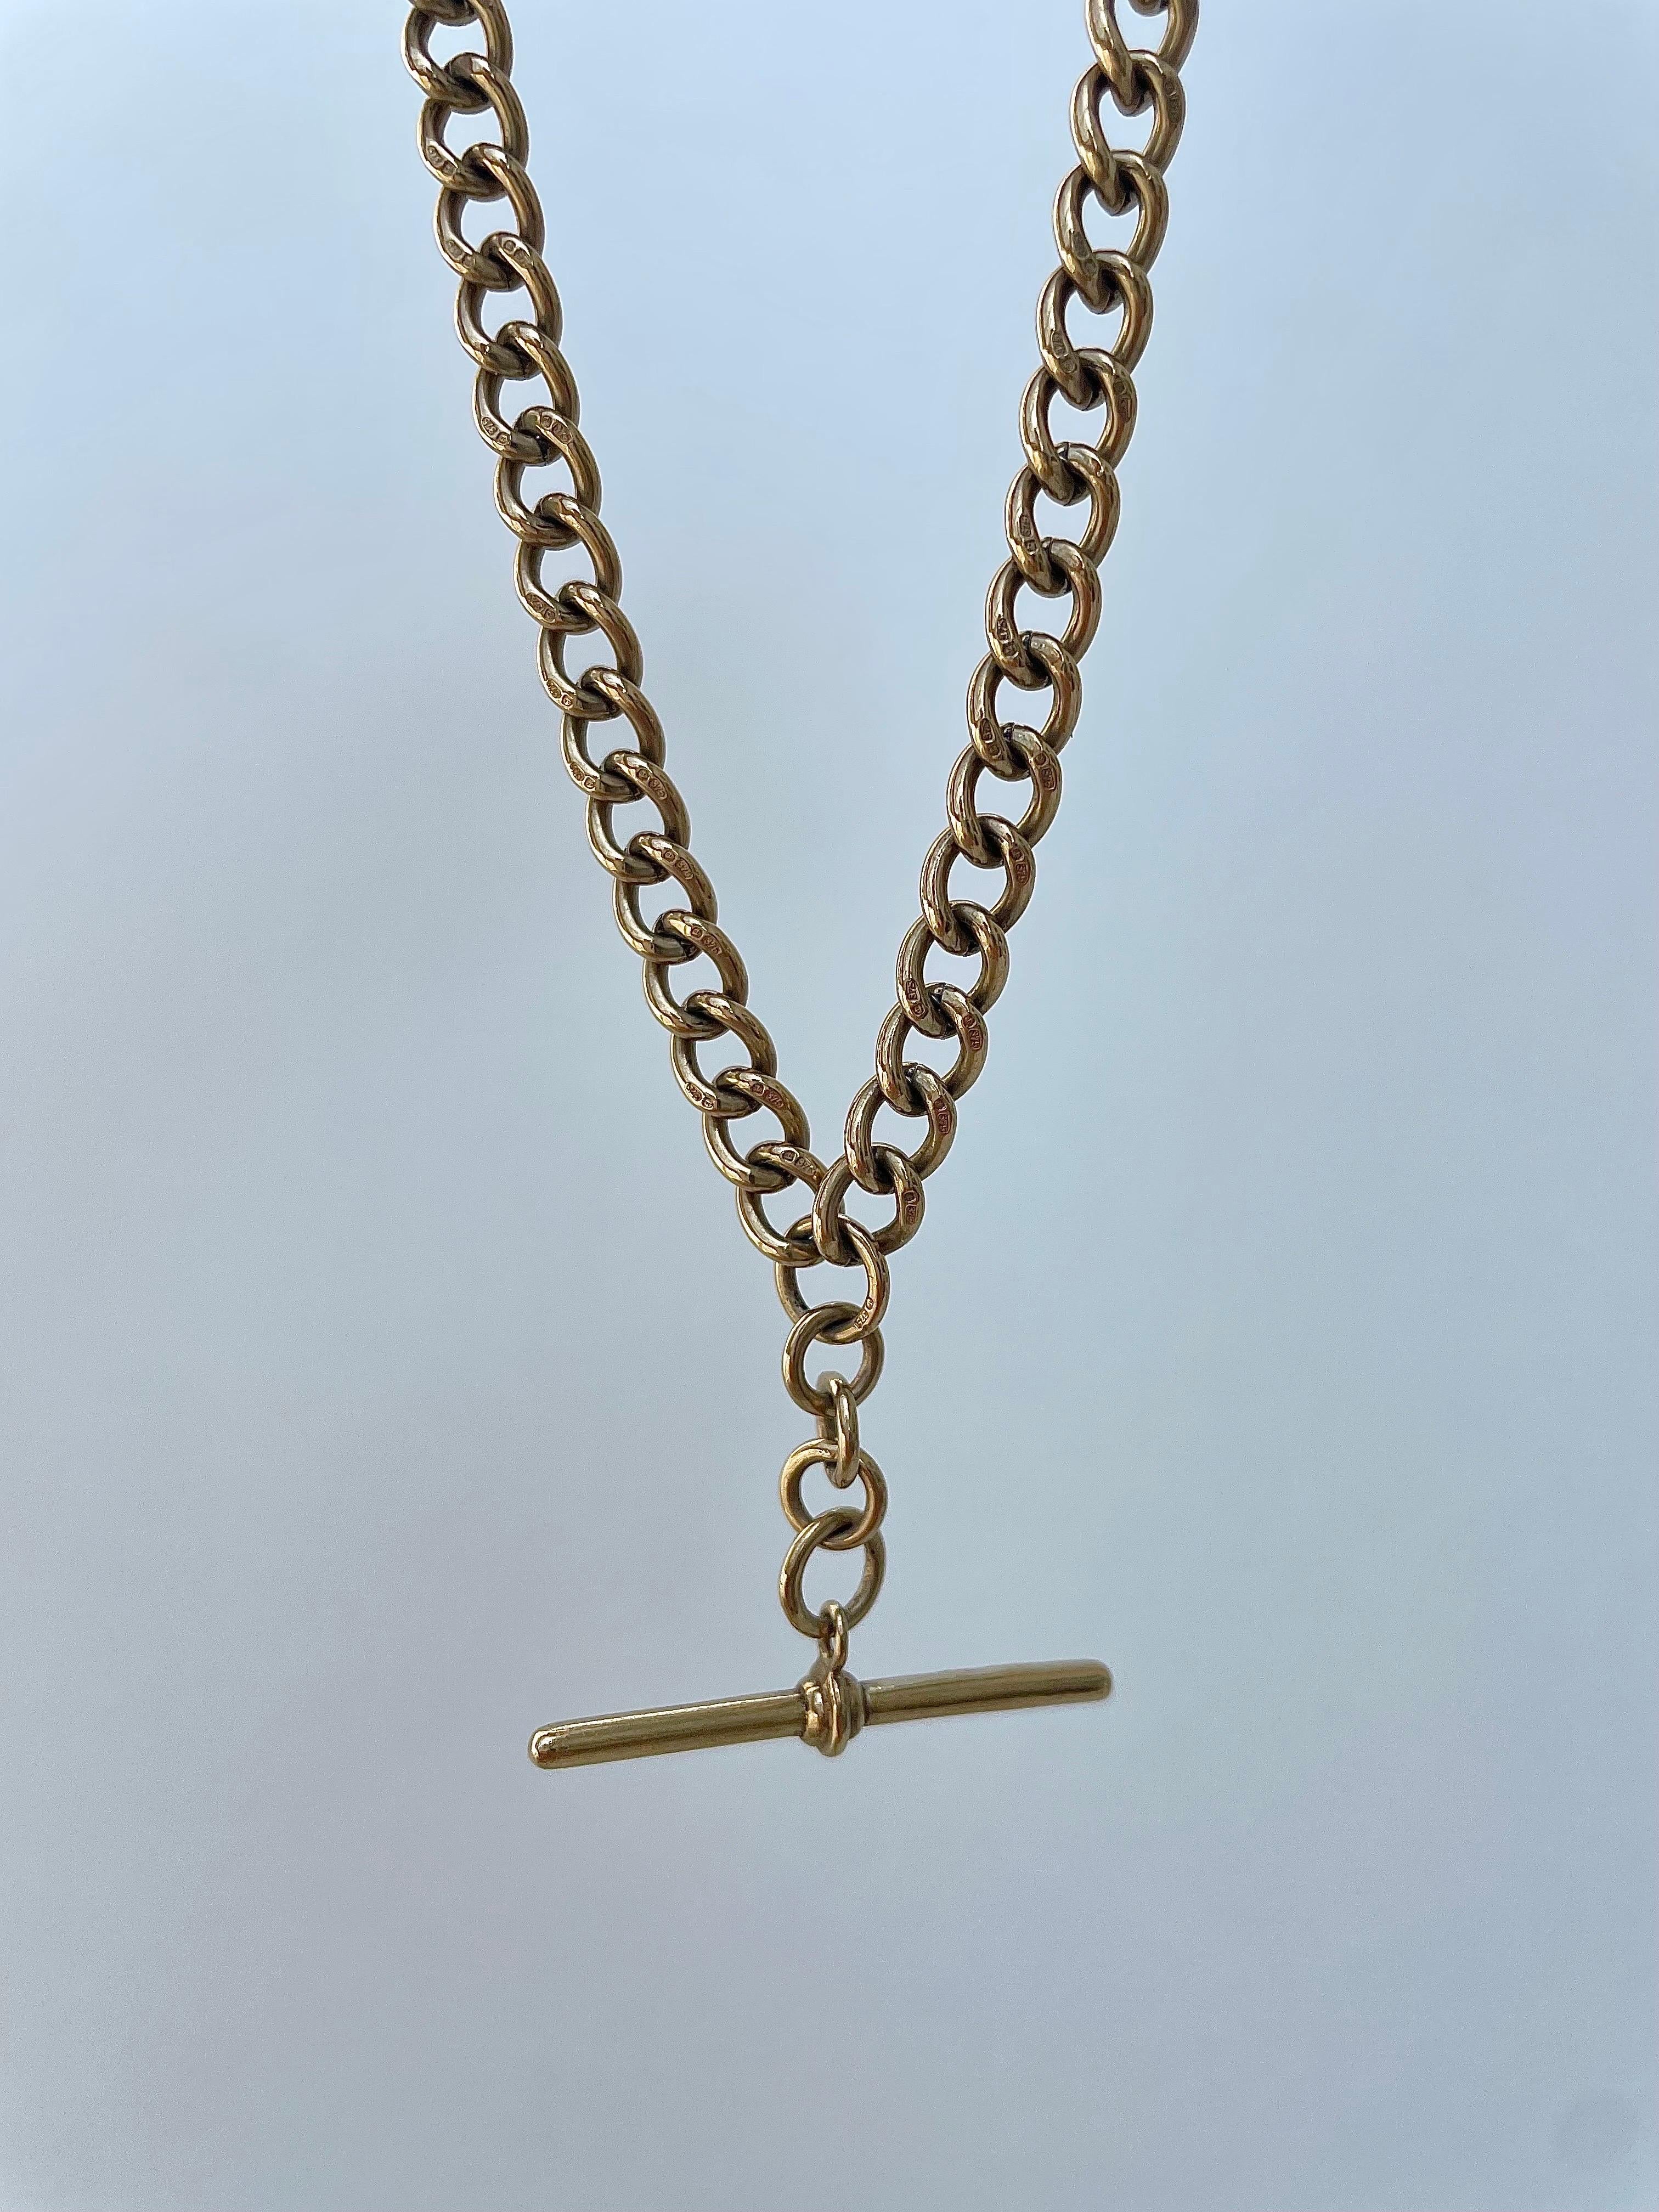 Antique 9ct Yellow Gold Double Albert Chain

classic and charming TBar chain

The item comes without the box in the photos but will be presented in a gift box

Measurements: weight 38g, length 46.3cm, width 6.1mm

Materials :  9ct yellow